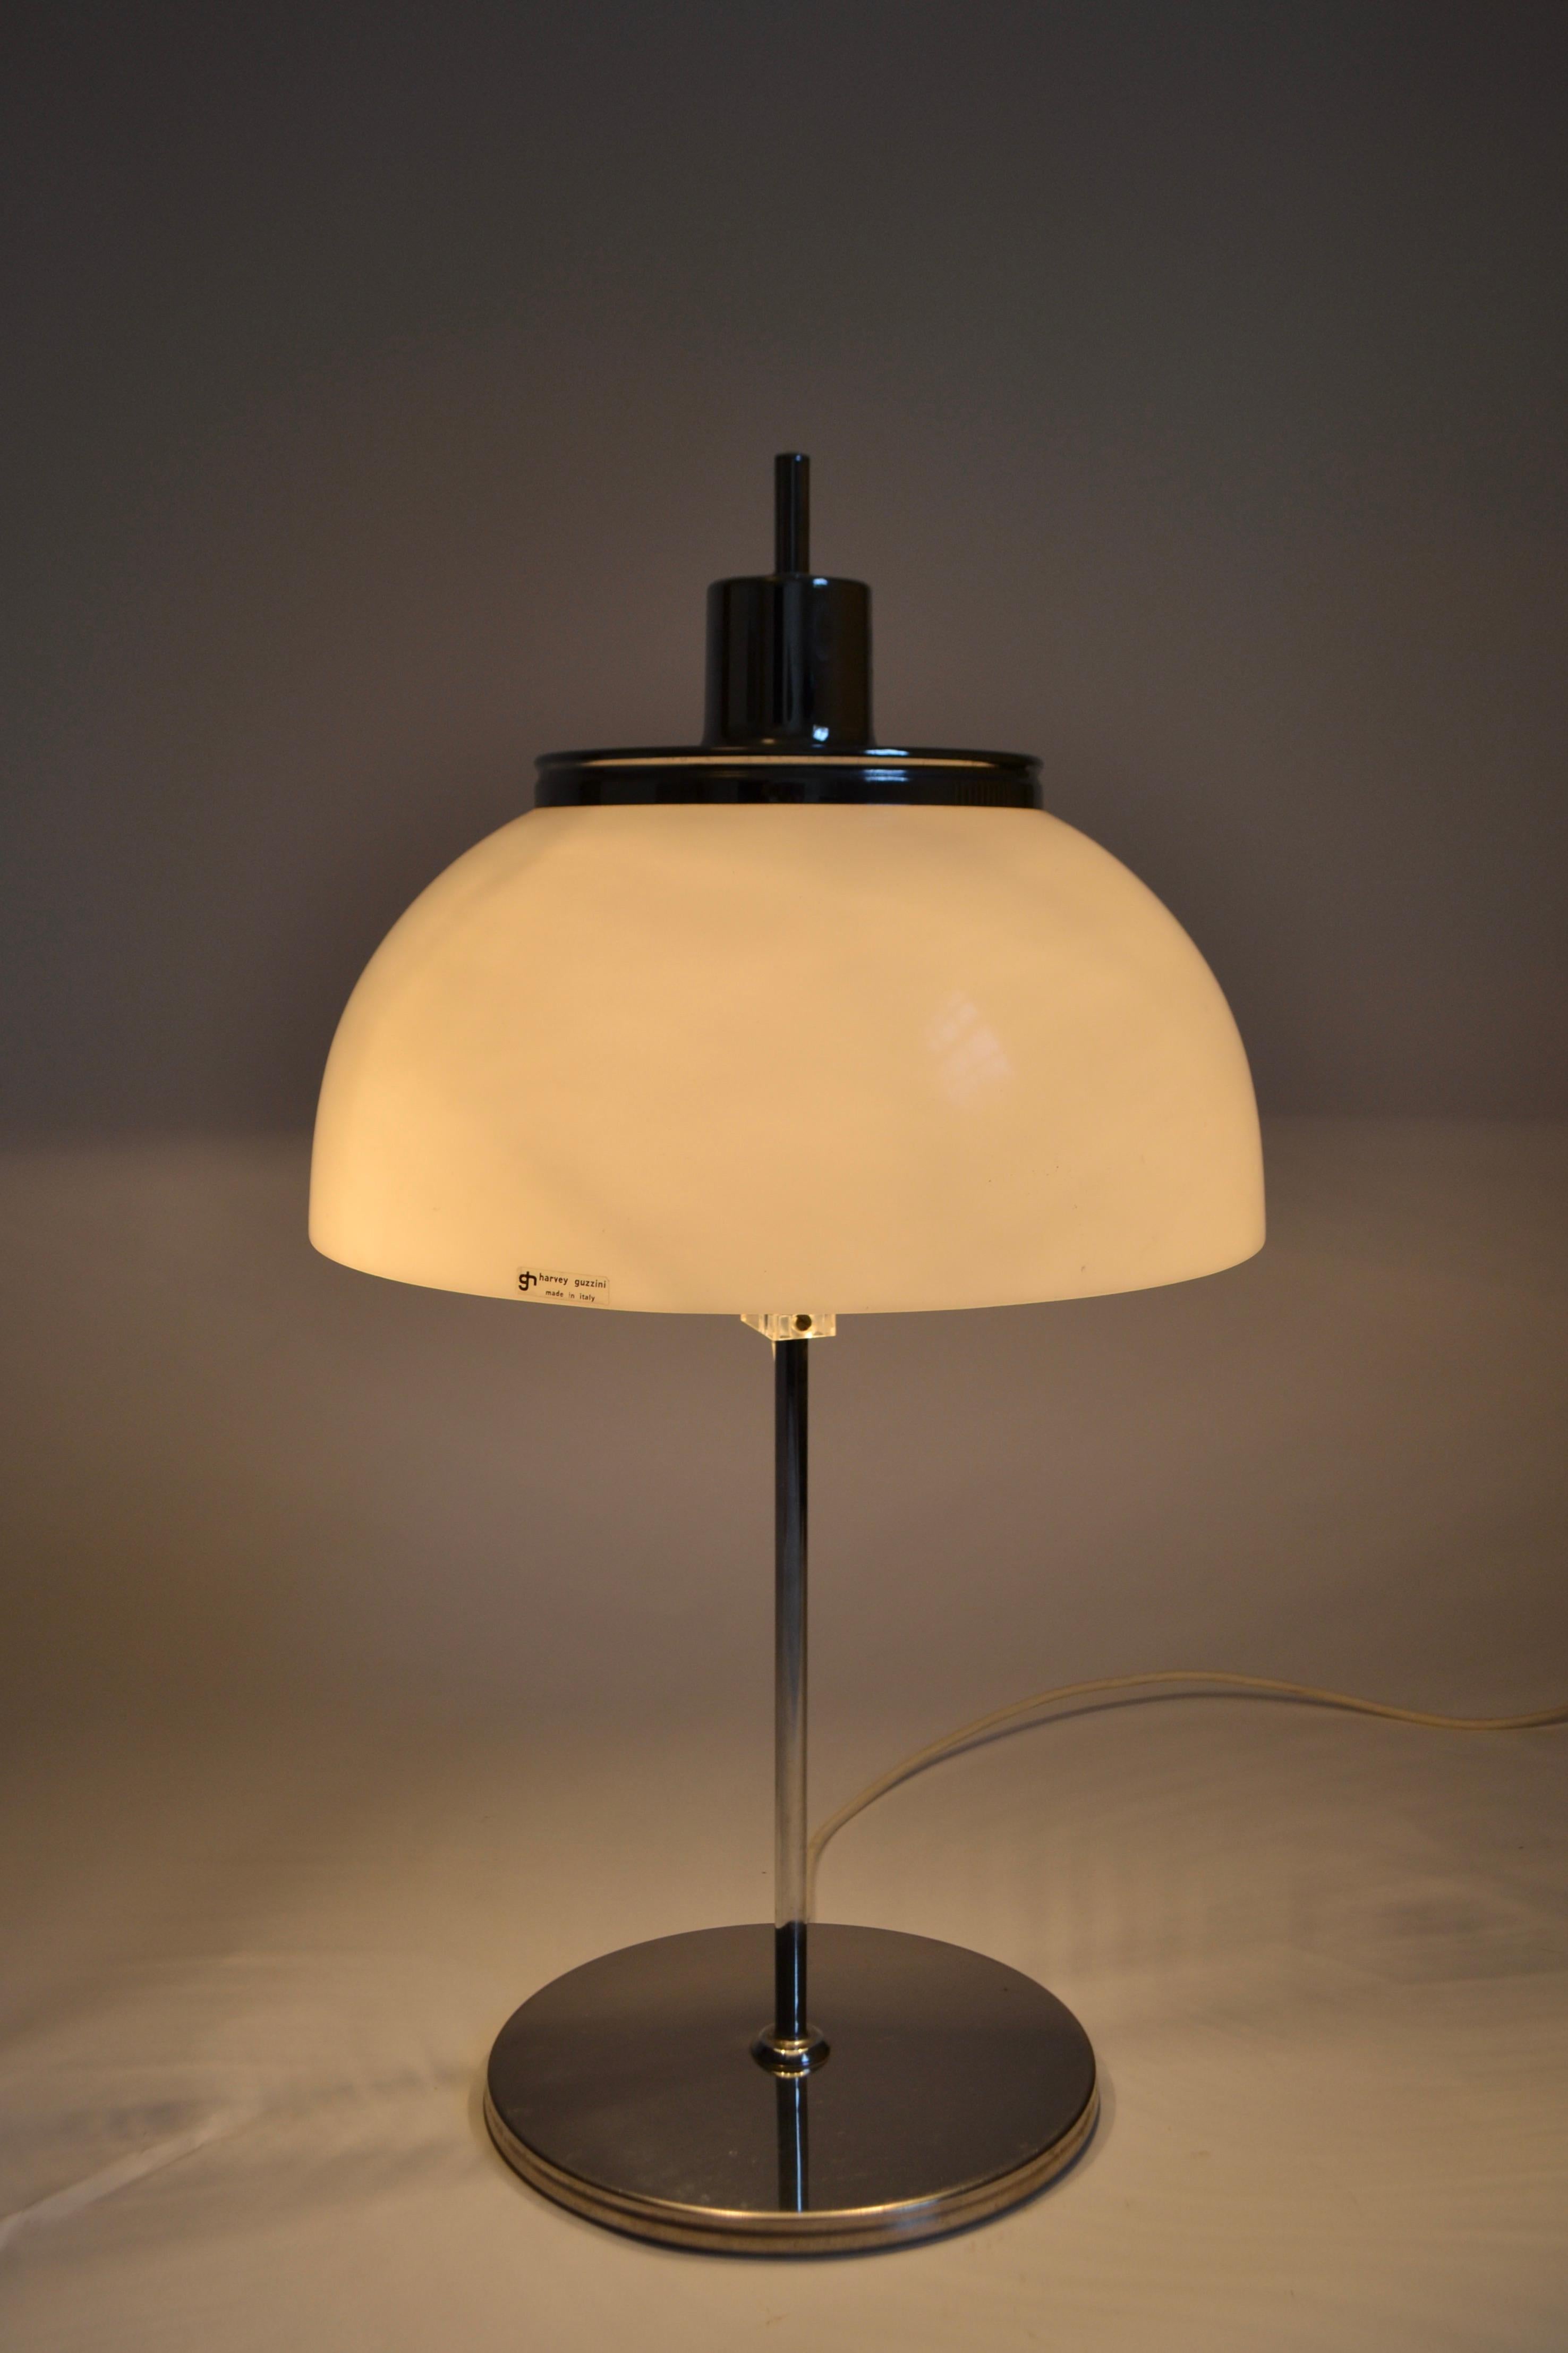 1970s Harvey Guzzini mushroom style Faro table lamp. Chrome plated with white acrylic shade. Height of shade is adjustable as it can move up and down the central column. Original Guzzini sticker still on shade. UK plug.